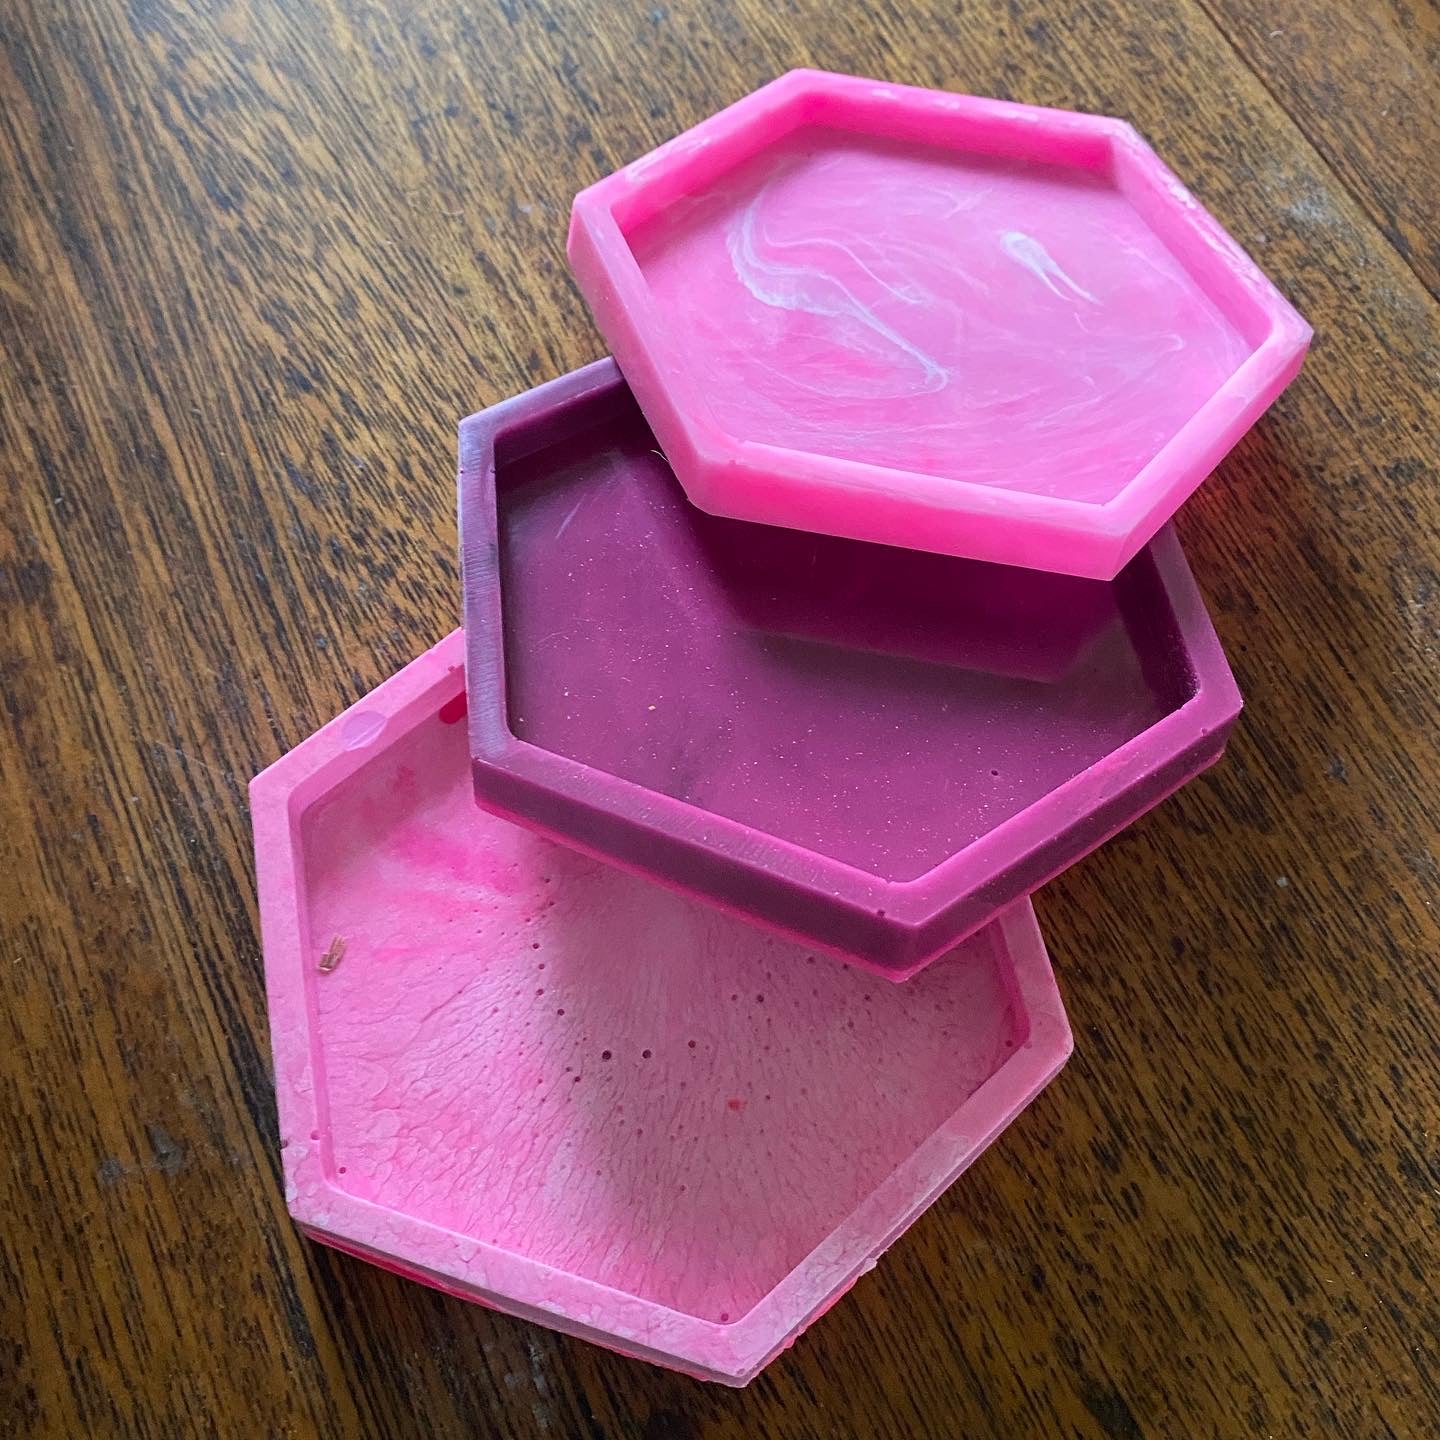 EarthTech Lifestyle Upcycled Resin Coasters - Pink Edition